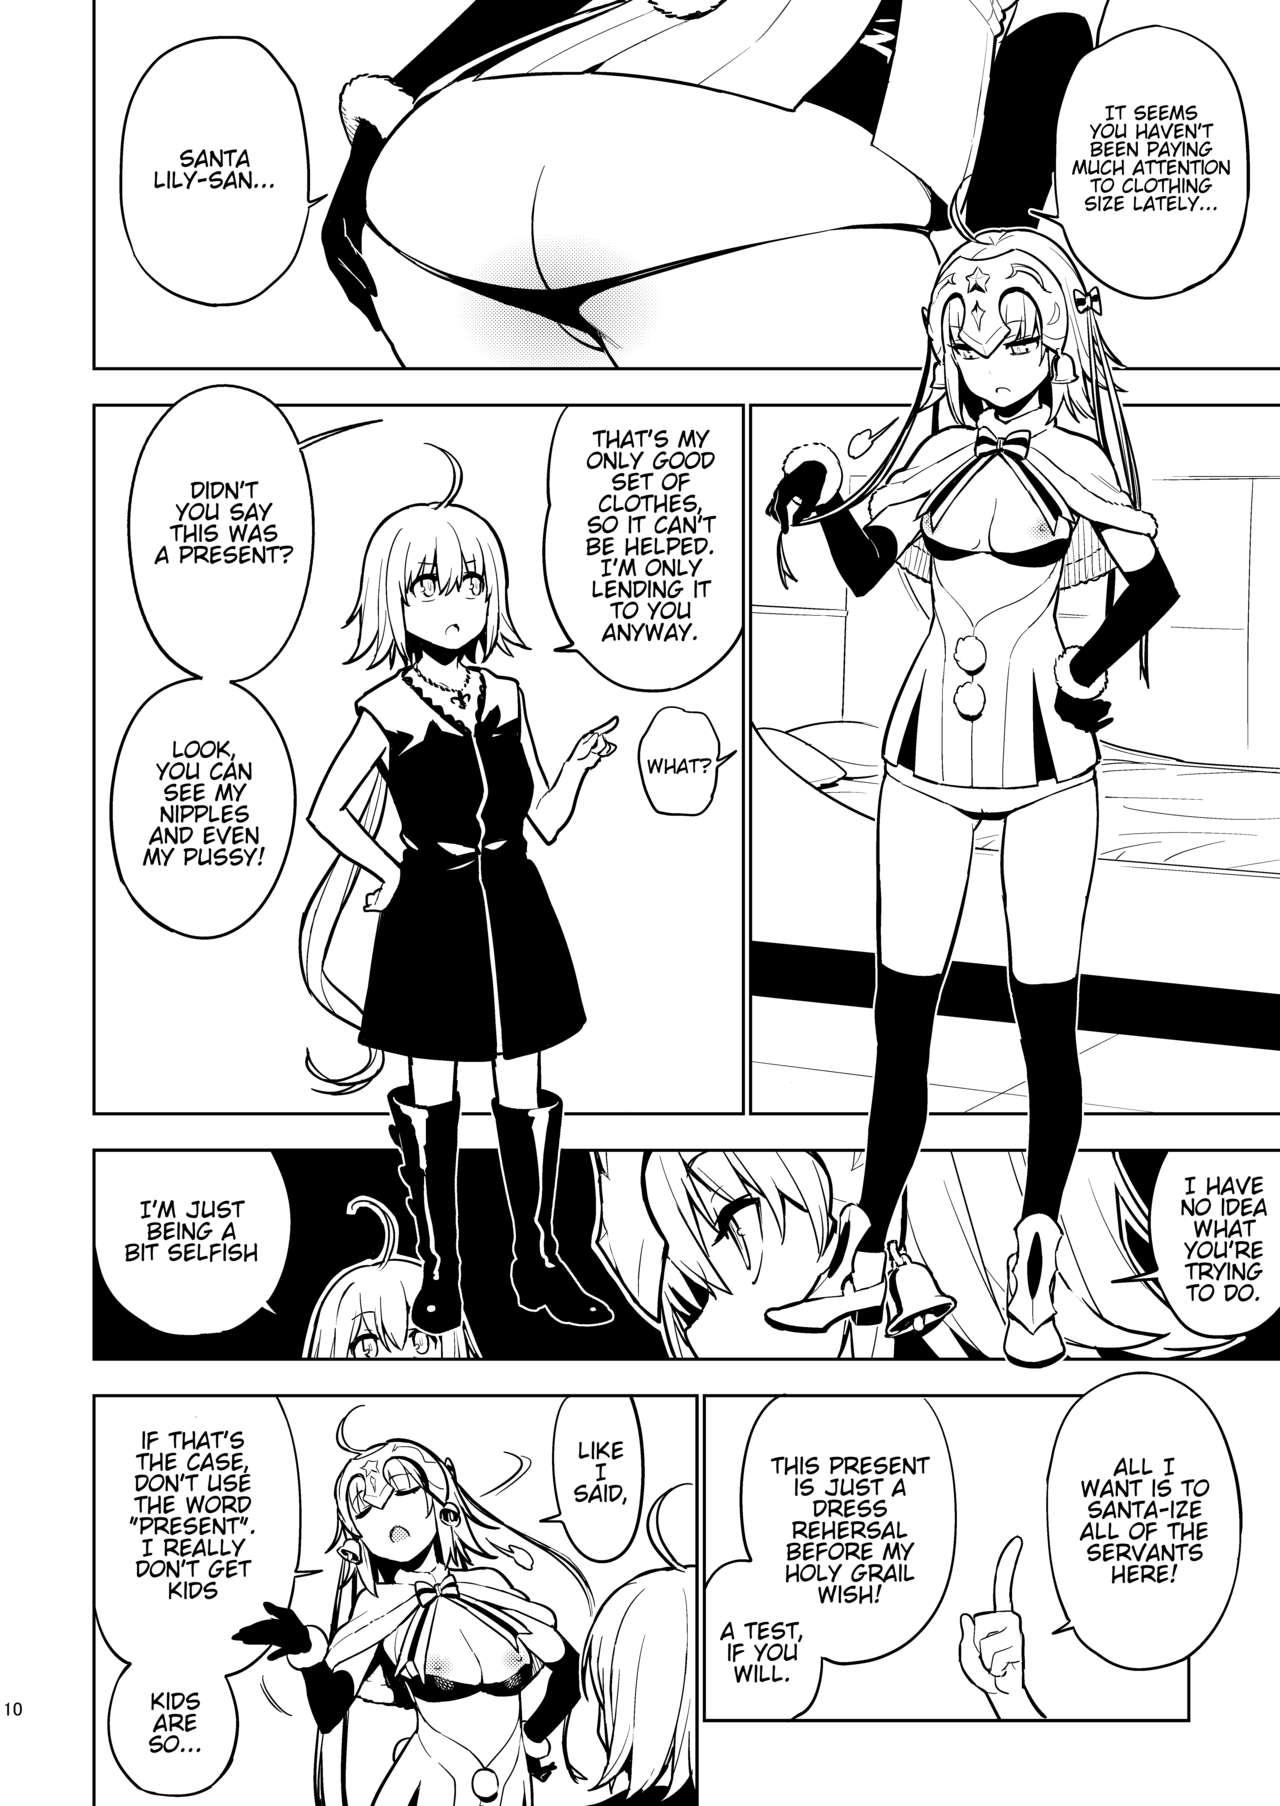 Jerking Off SO BORED - Fate grand order Fresh - Page 8